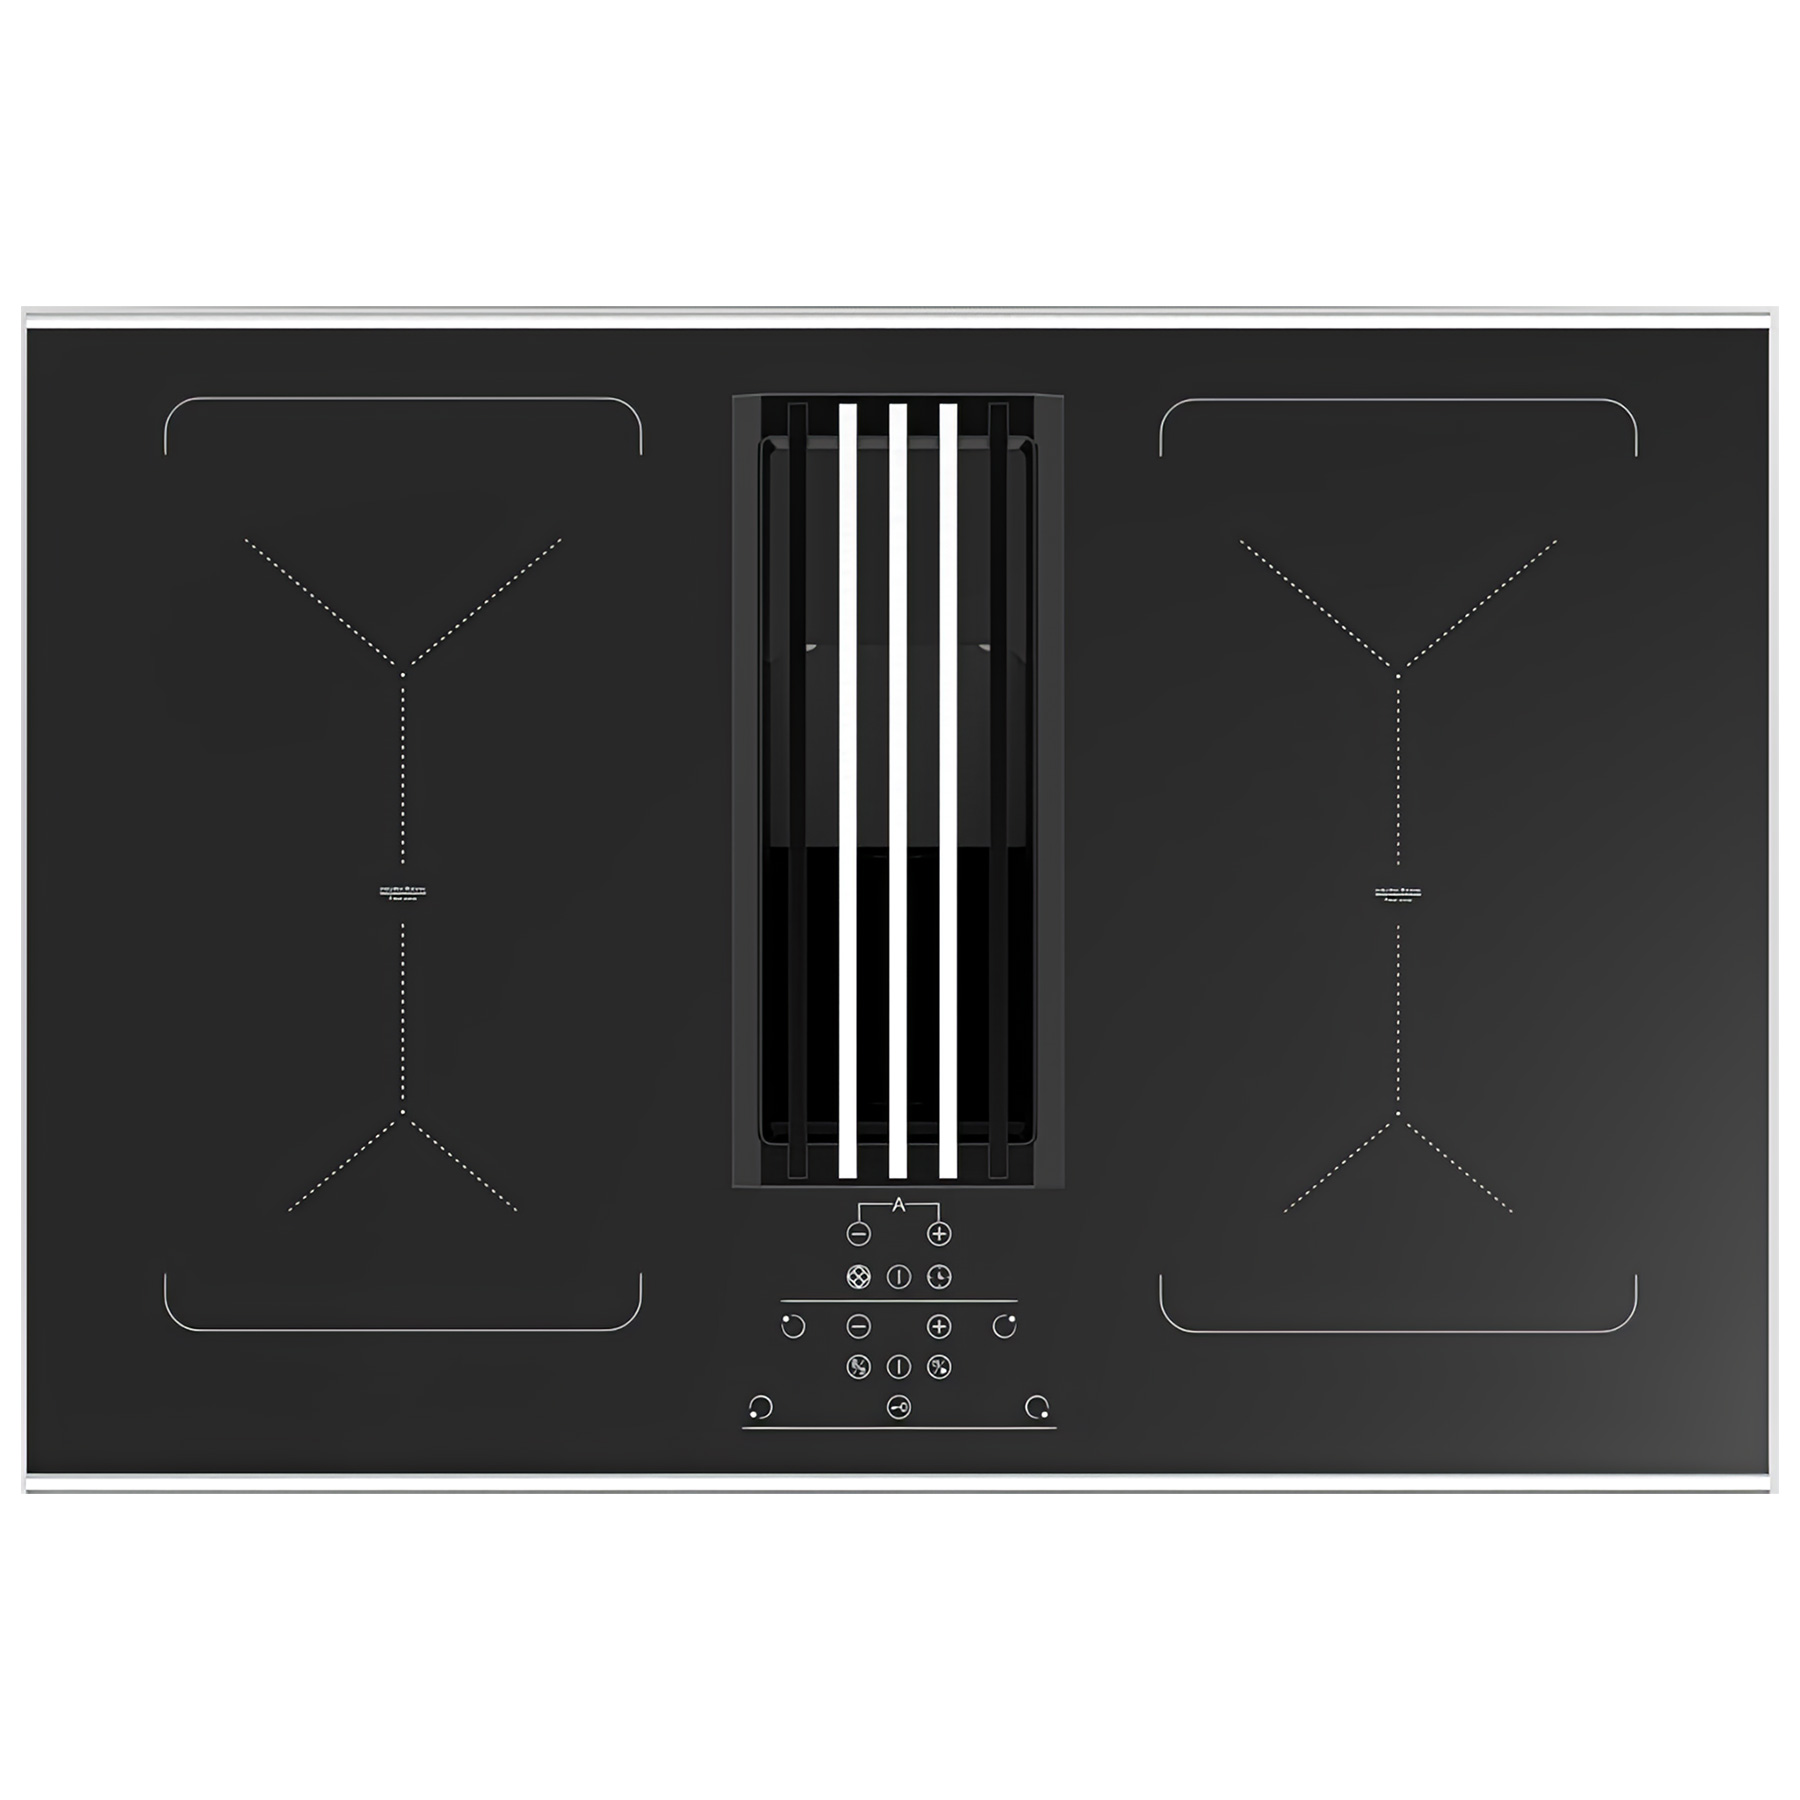 Image of Culina ICONFXP75DDS 77cm 4 Zone Flex Induction Venting Hob in Black